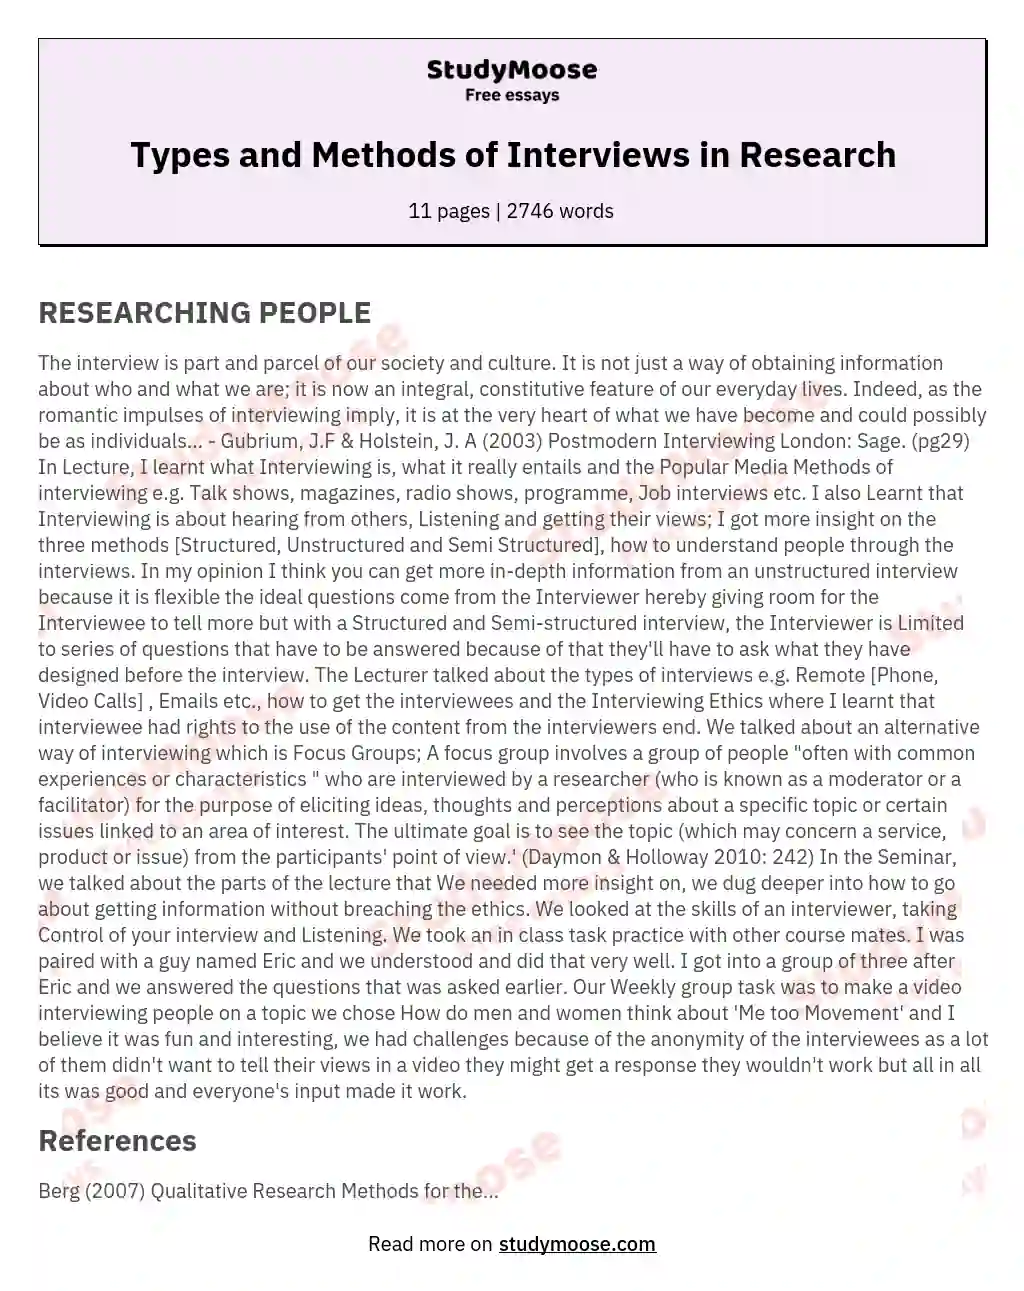 Types and Methods of Interviews in Research